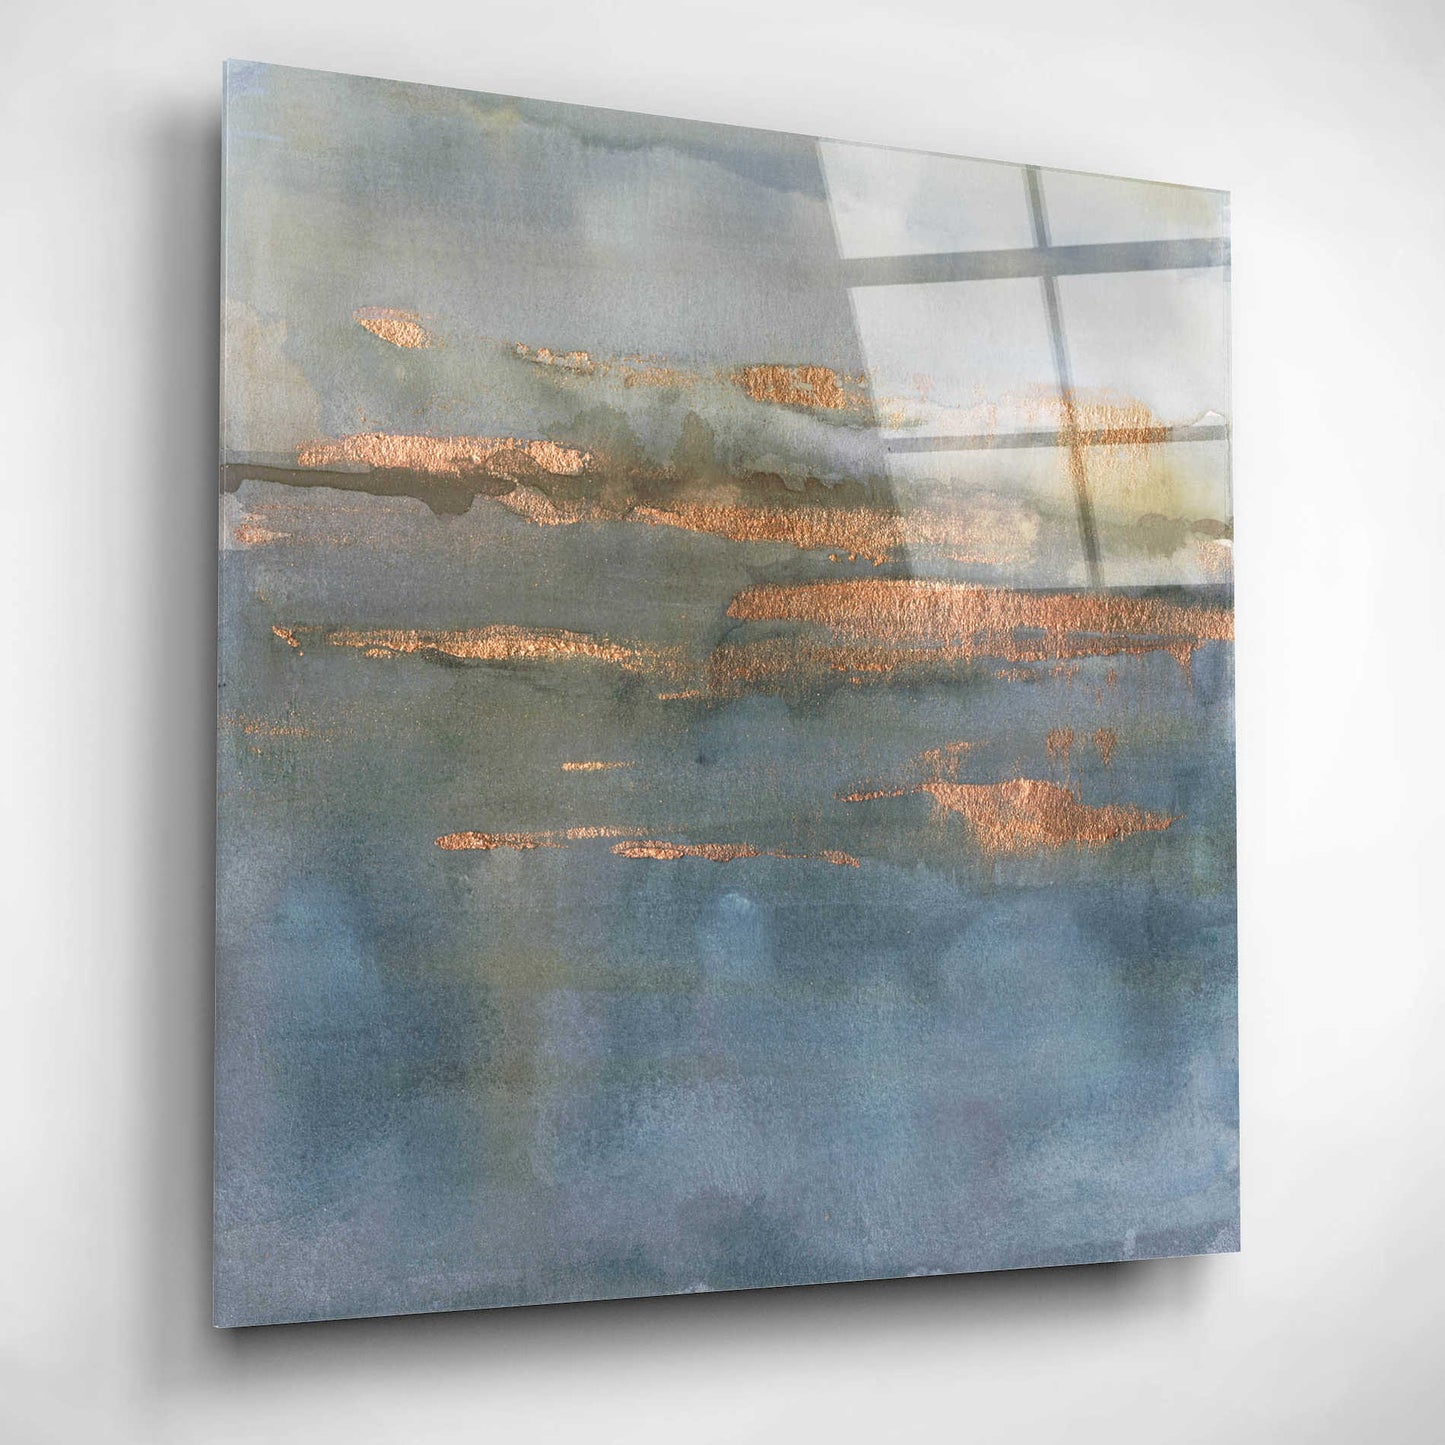 Epic Art 'Copper Emulsion II' by Victoria Borges, Acrylic Glass Wall Art,12x12